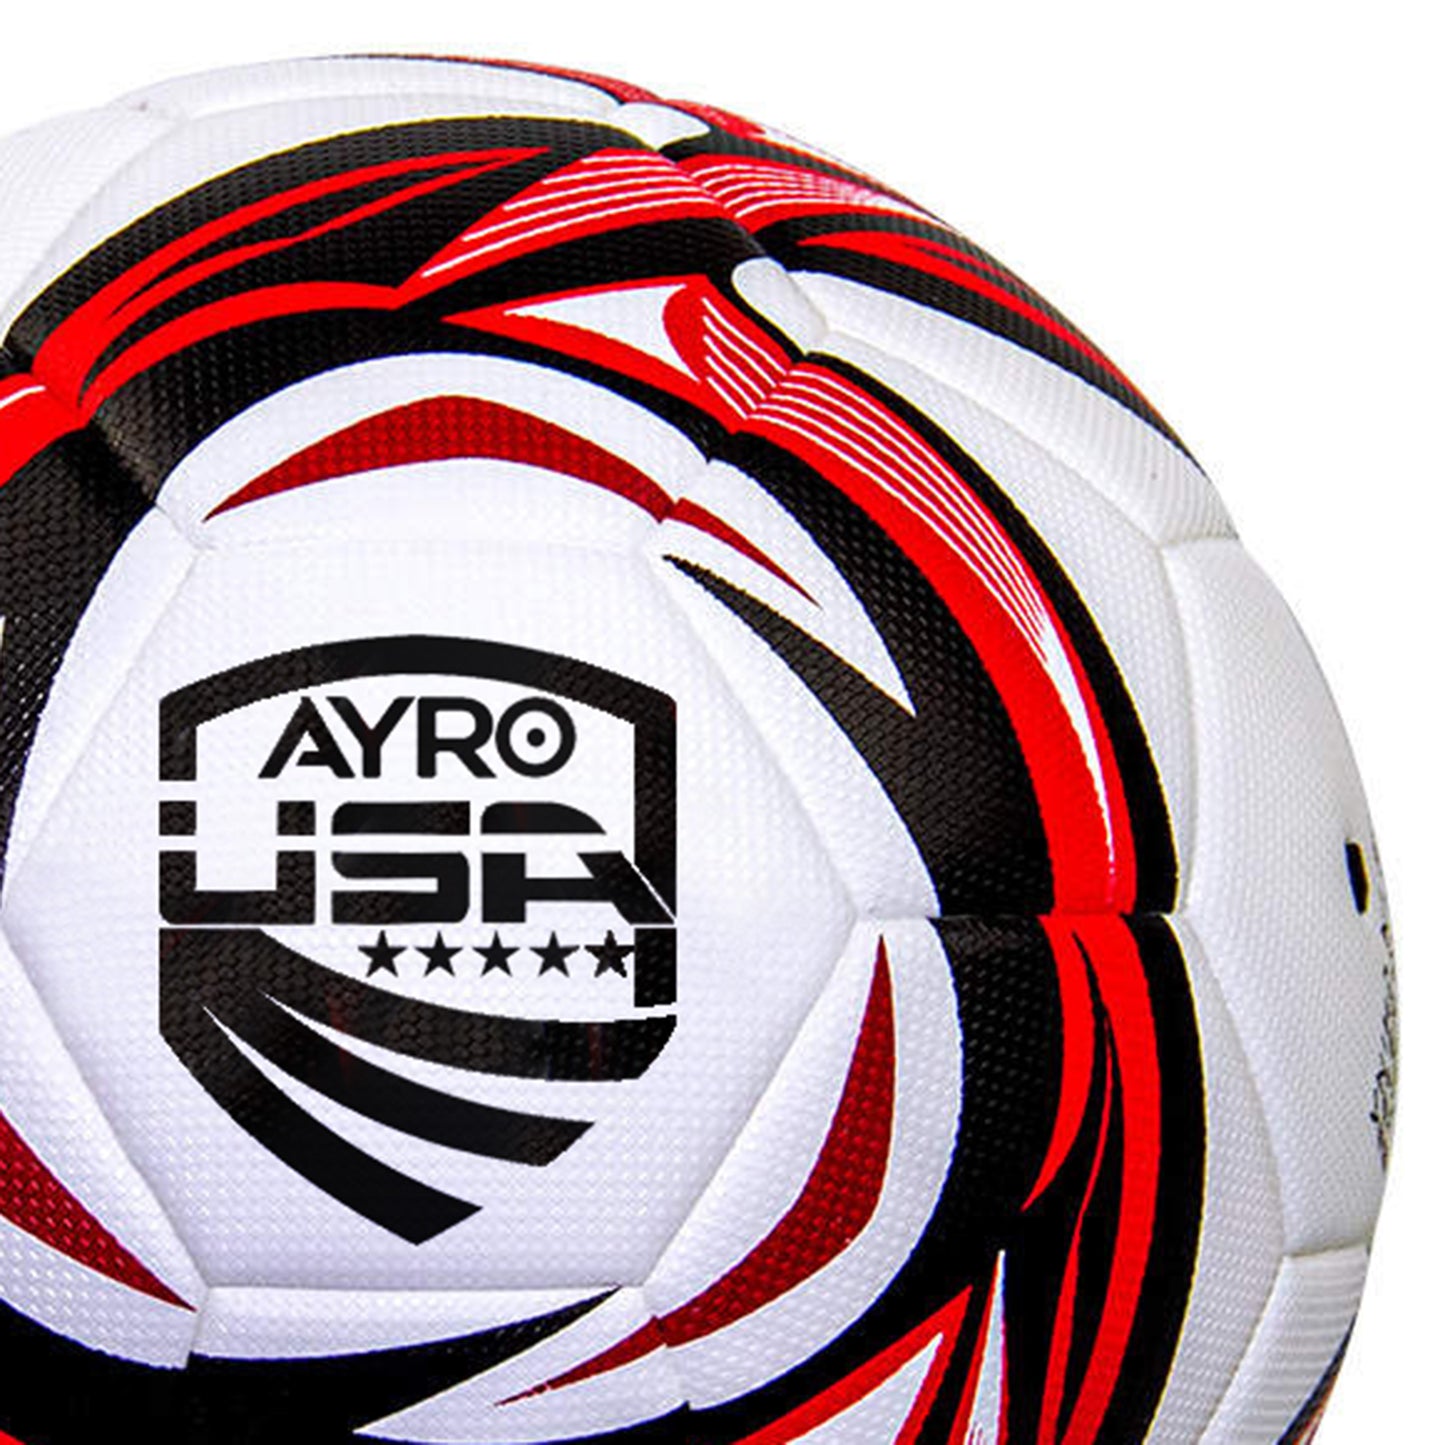 Performance Textured Match Ball with Thermal-Bonded Seams - Size 4